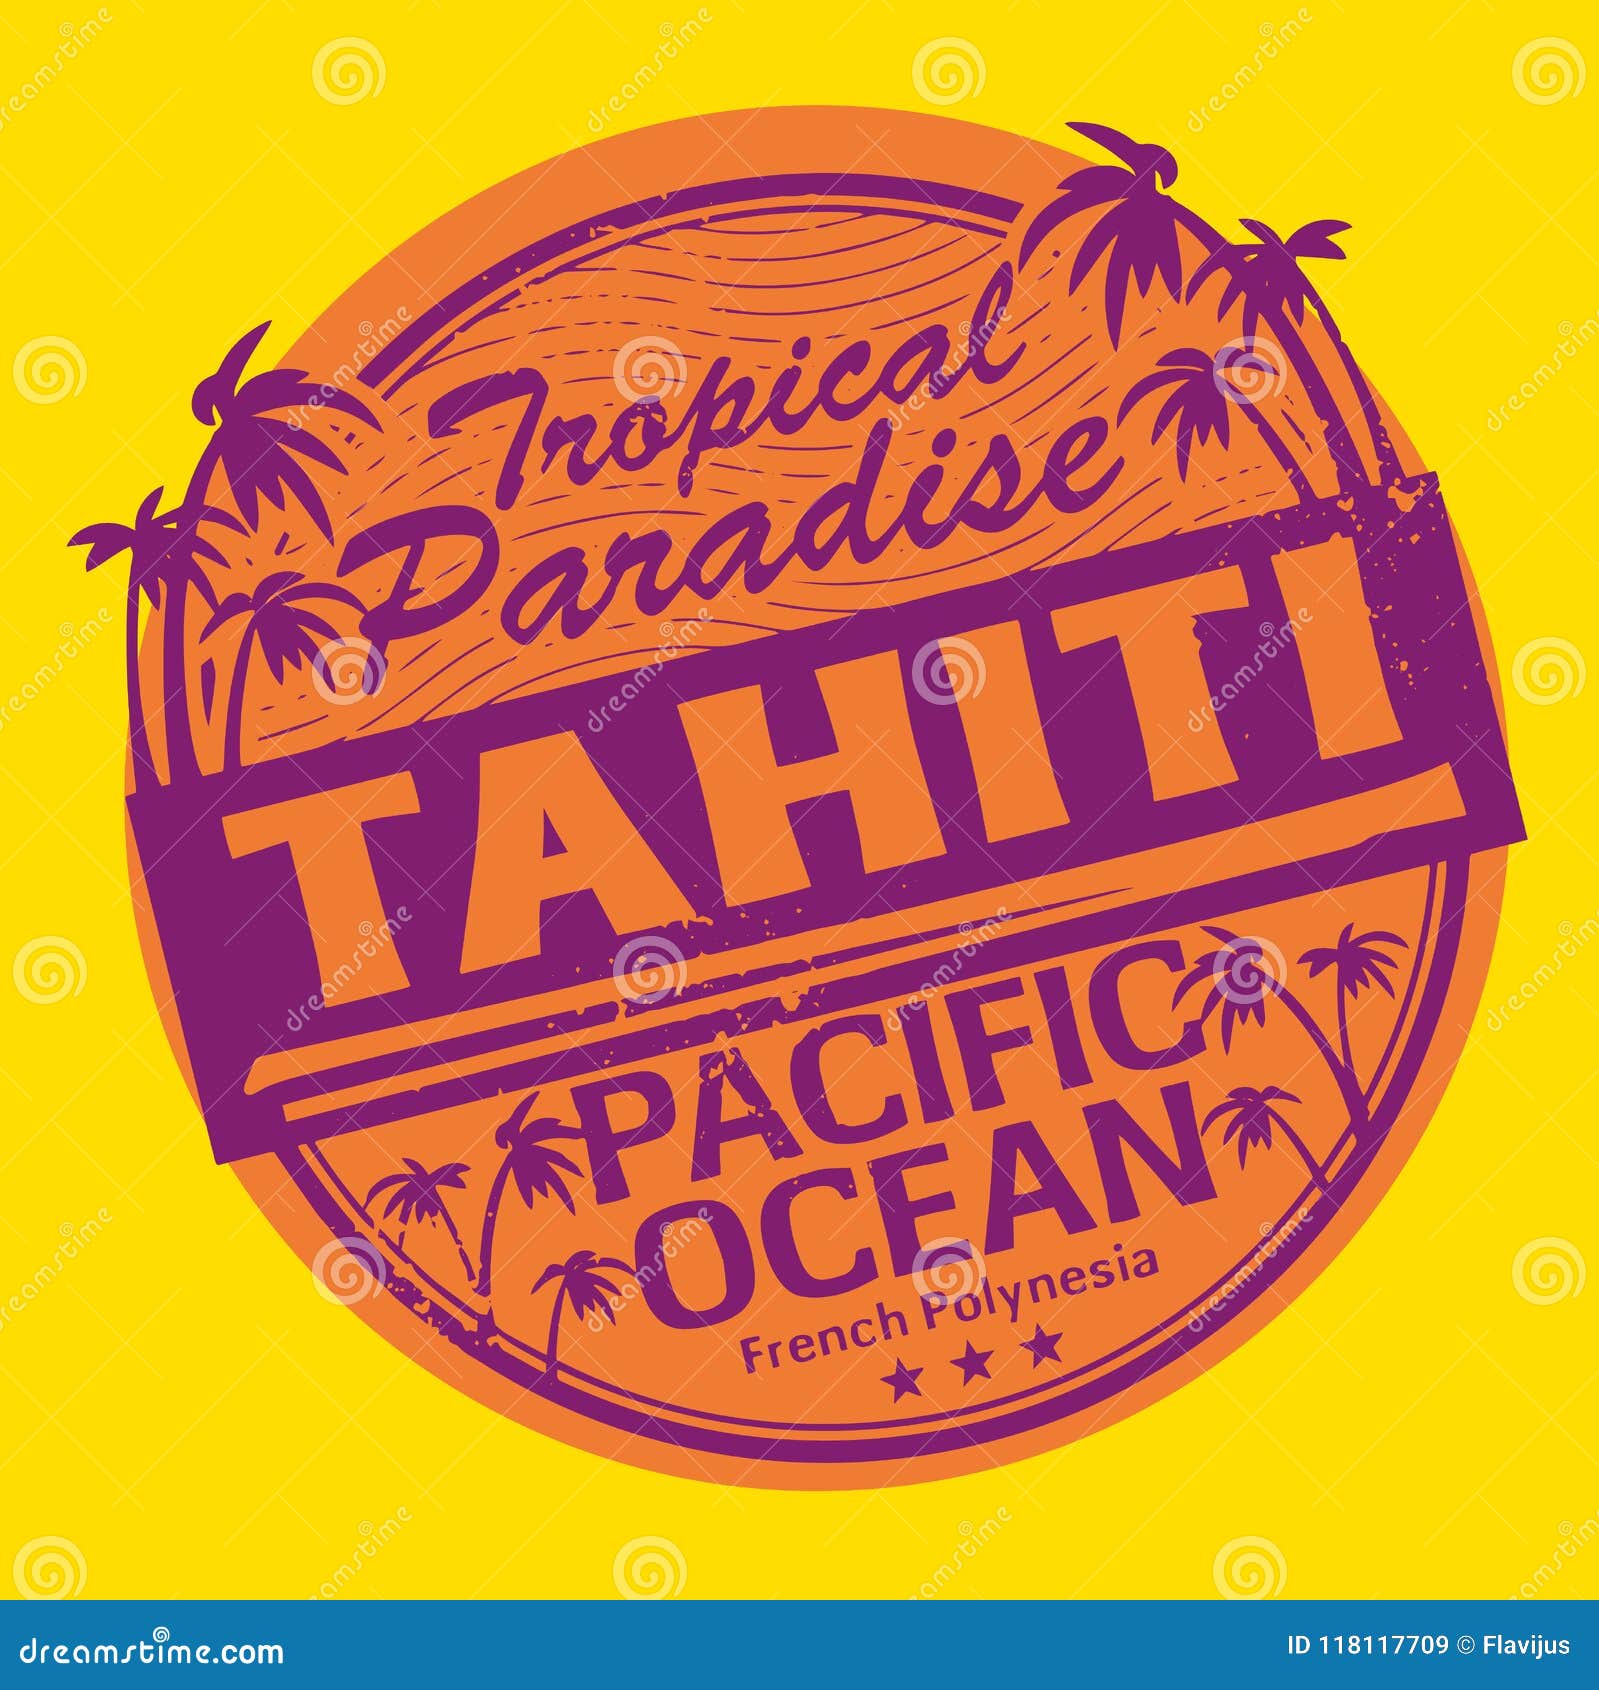 grunge rubber stamp or label with the name of tahiti